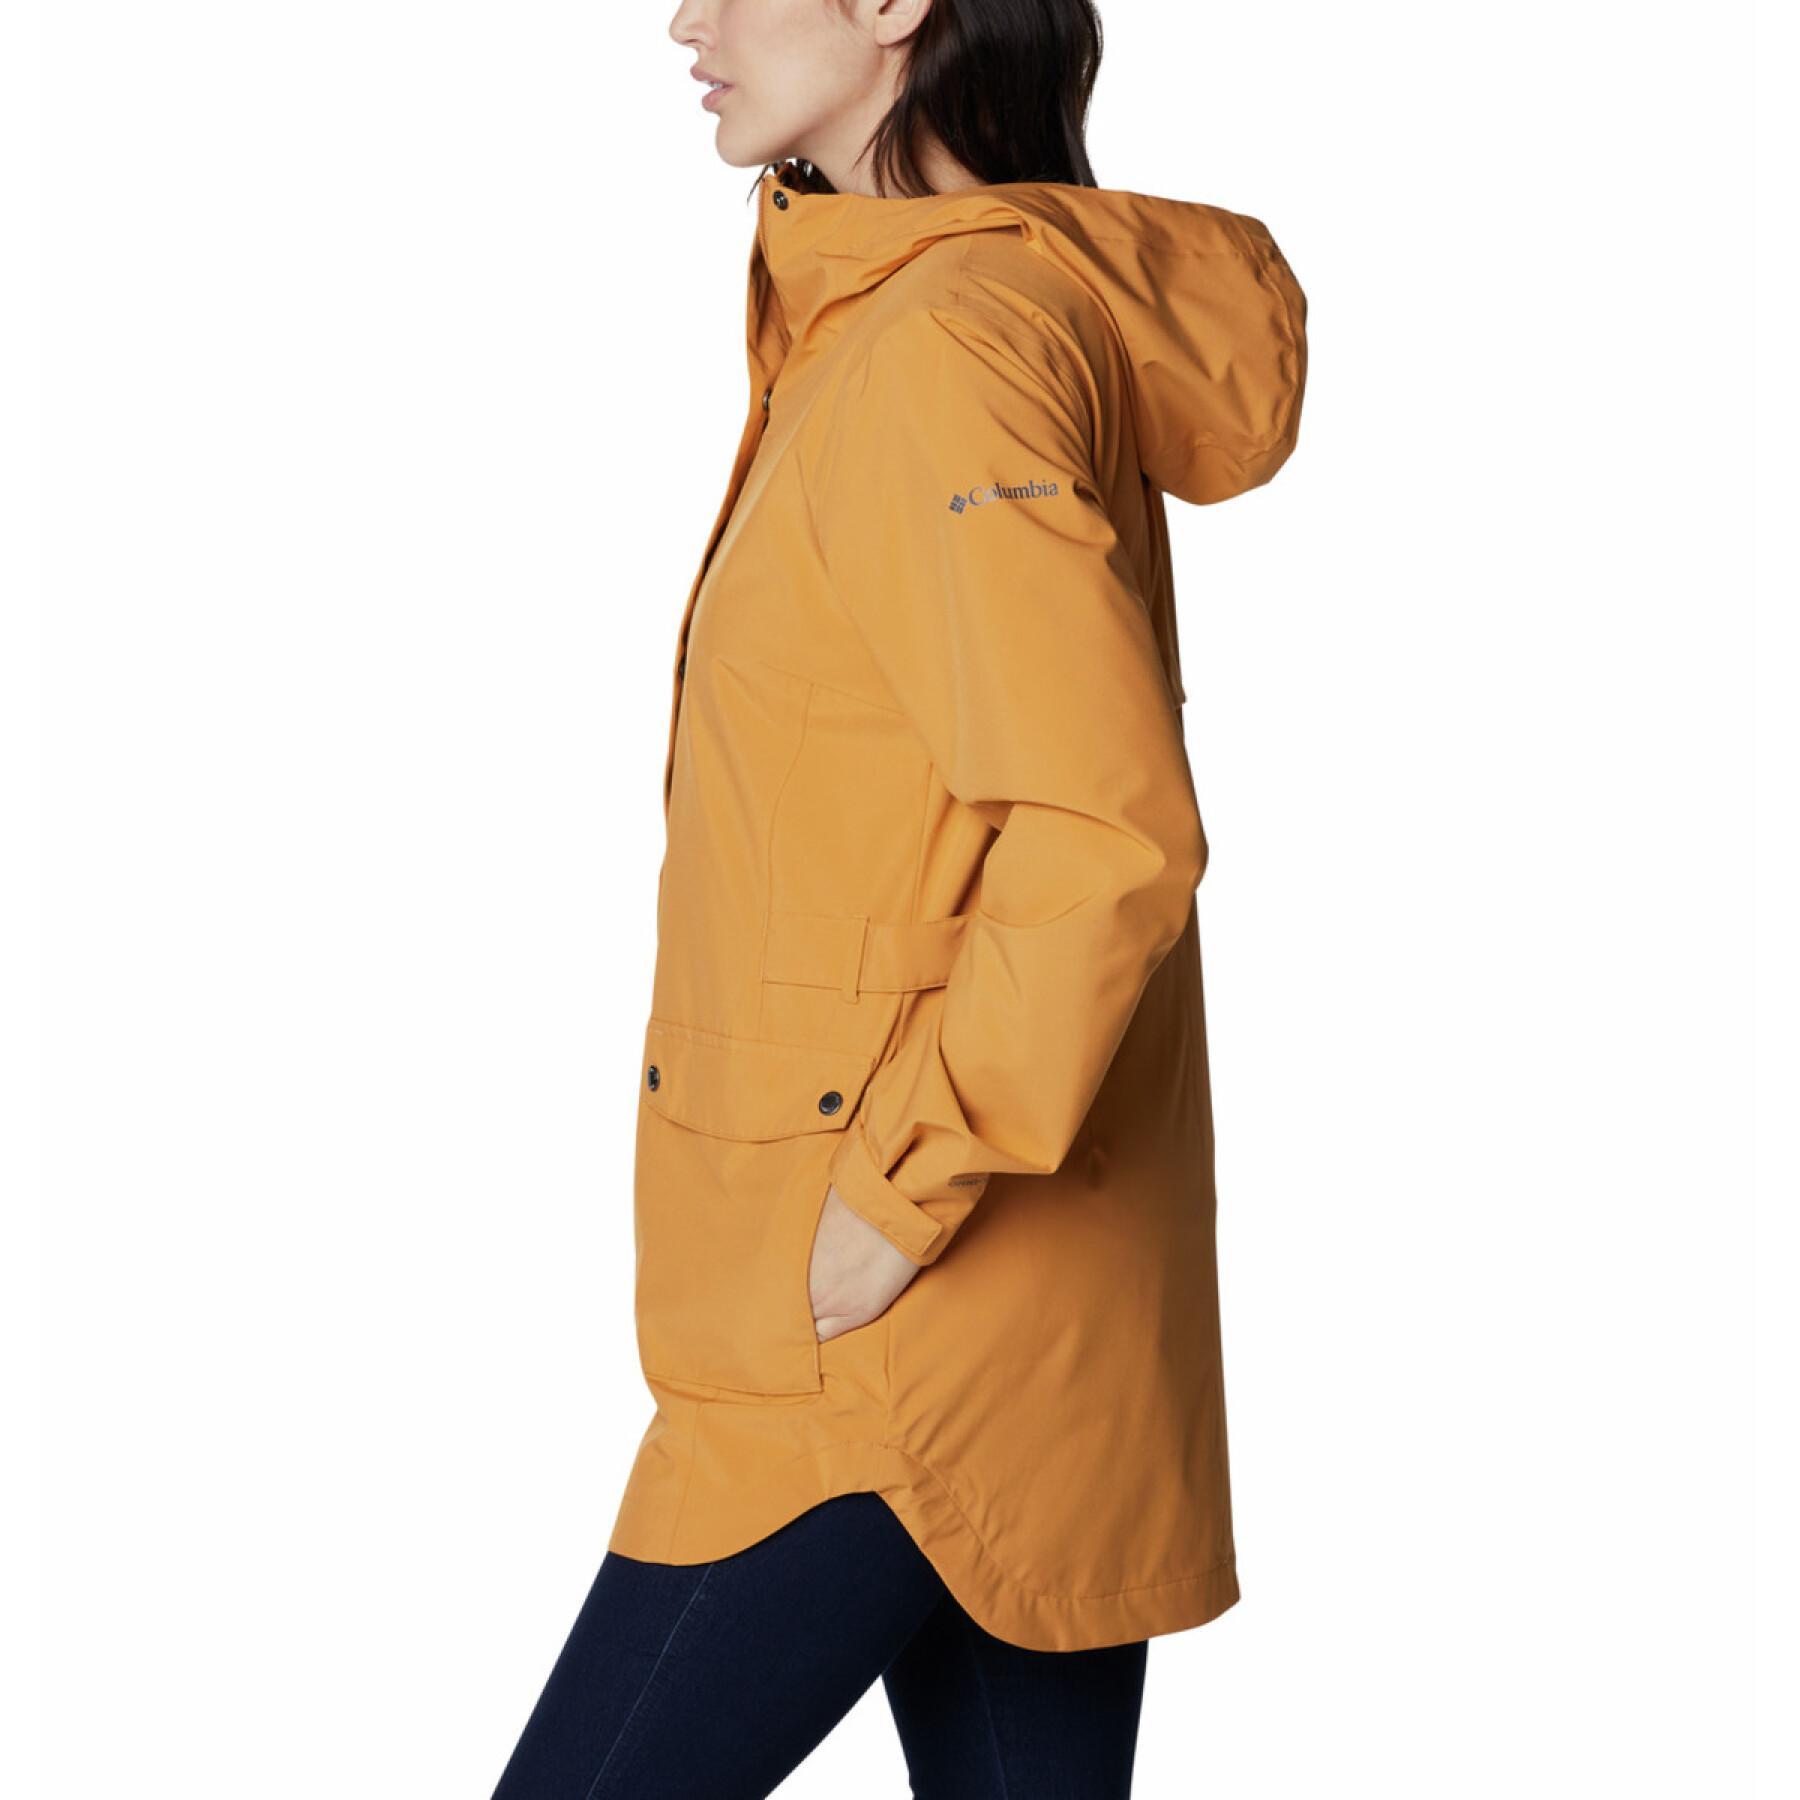 Women's waterproof jacket Columbia Here And There Trench